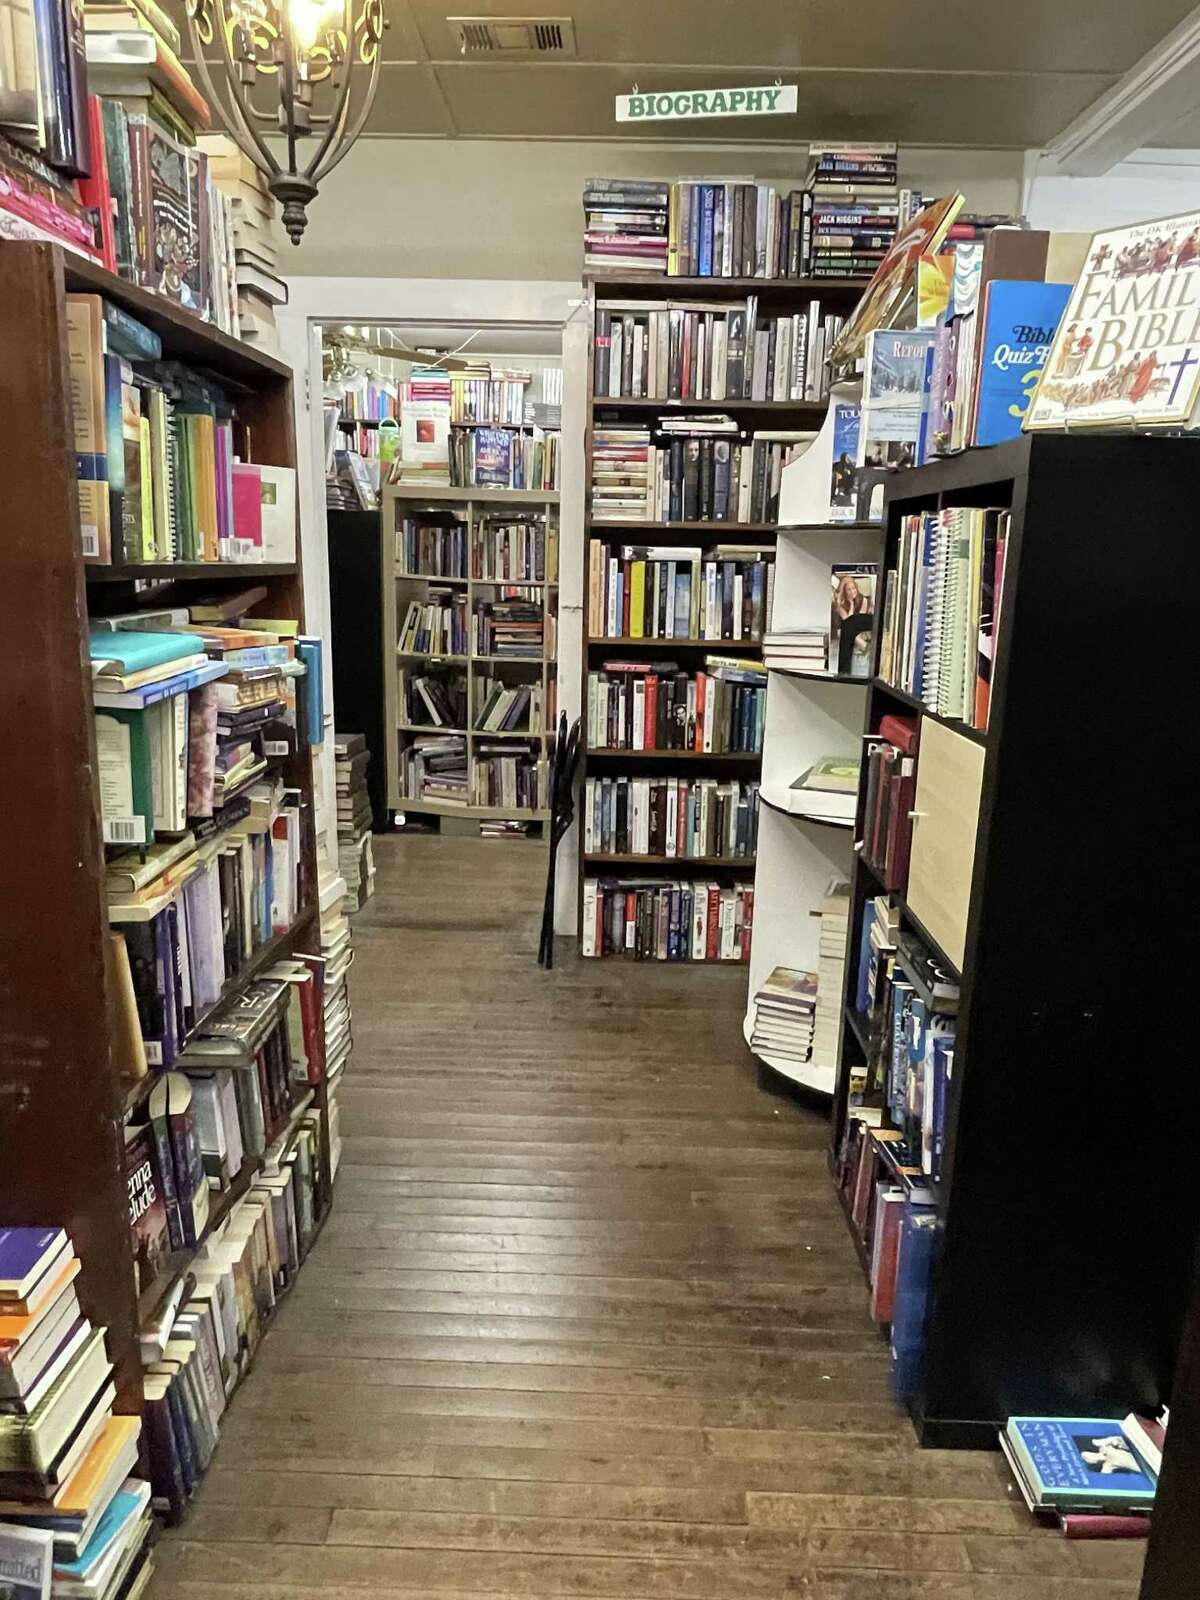 The Book Attic in Tomball offers a variety of new and used books.